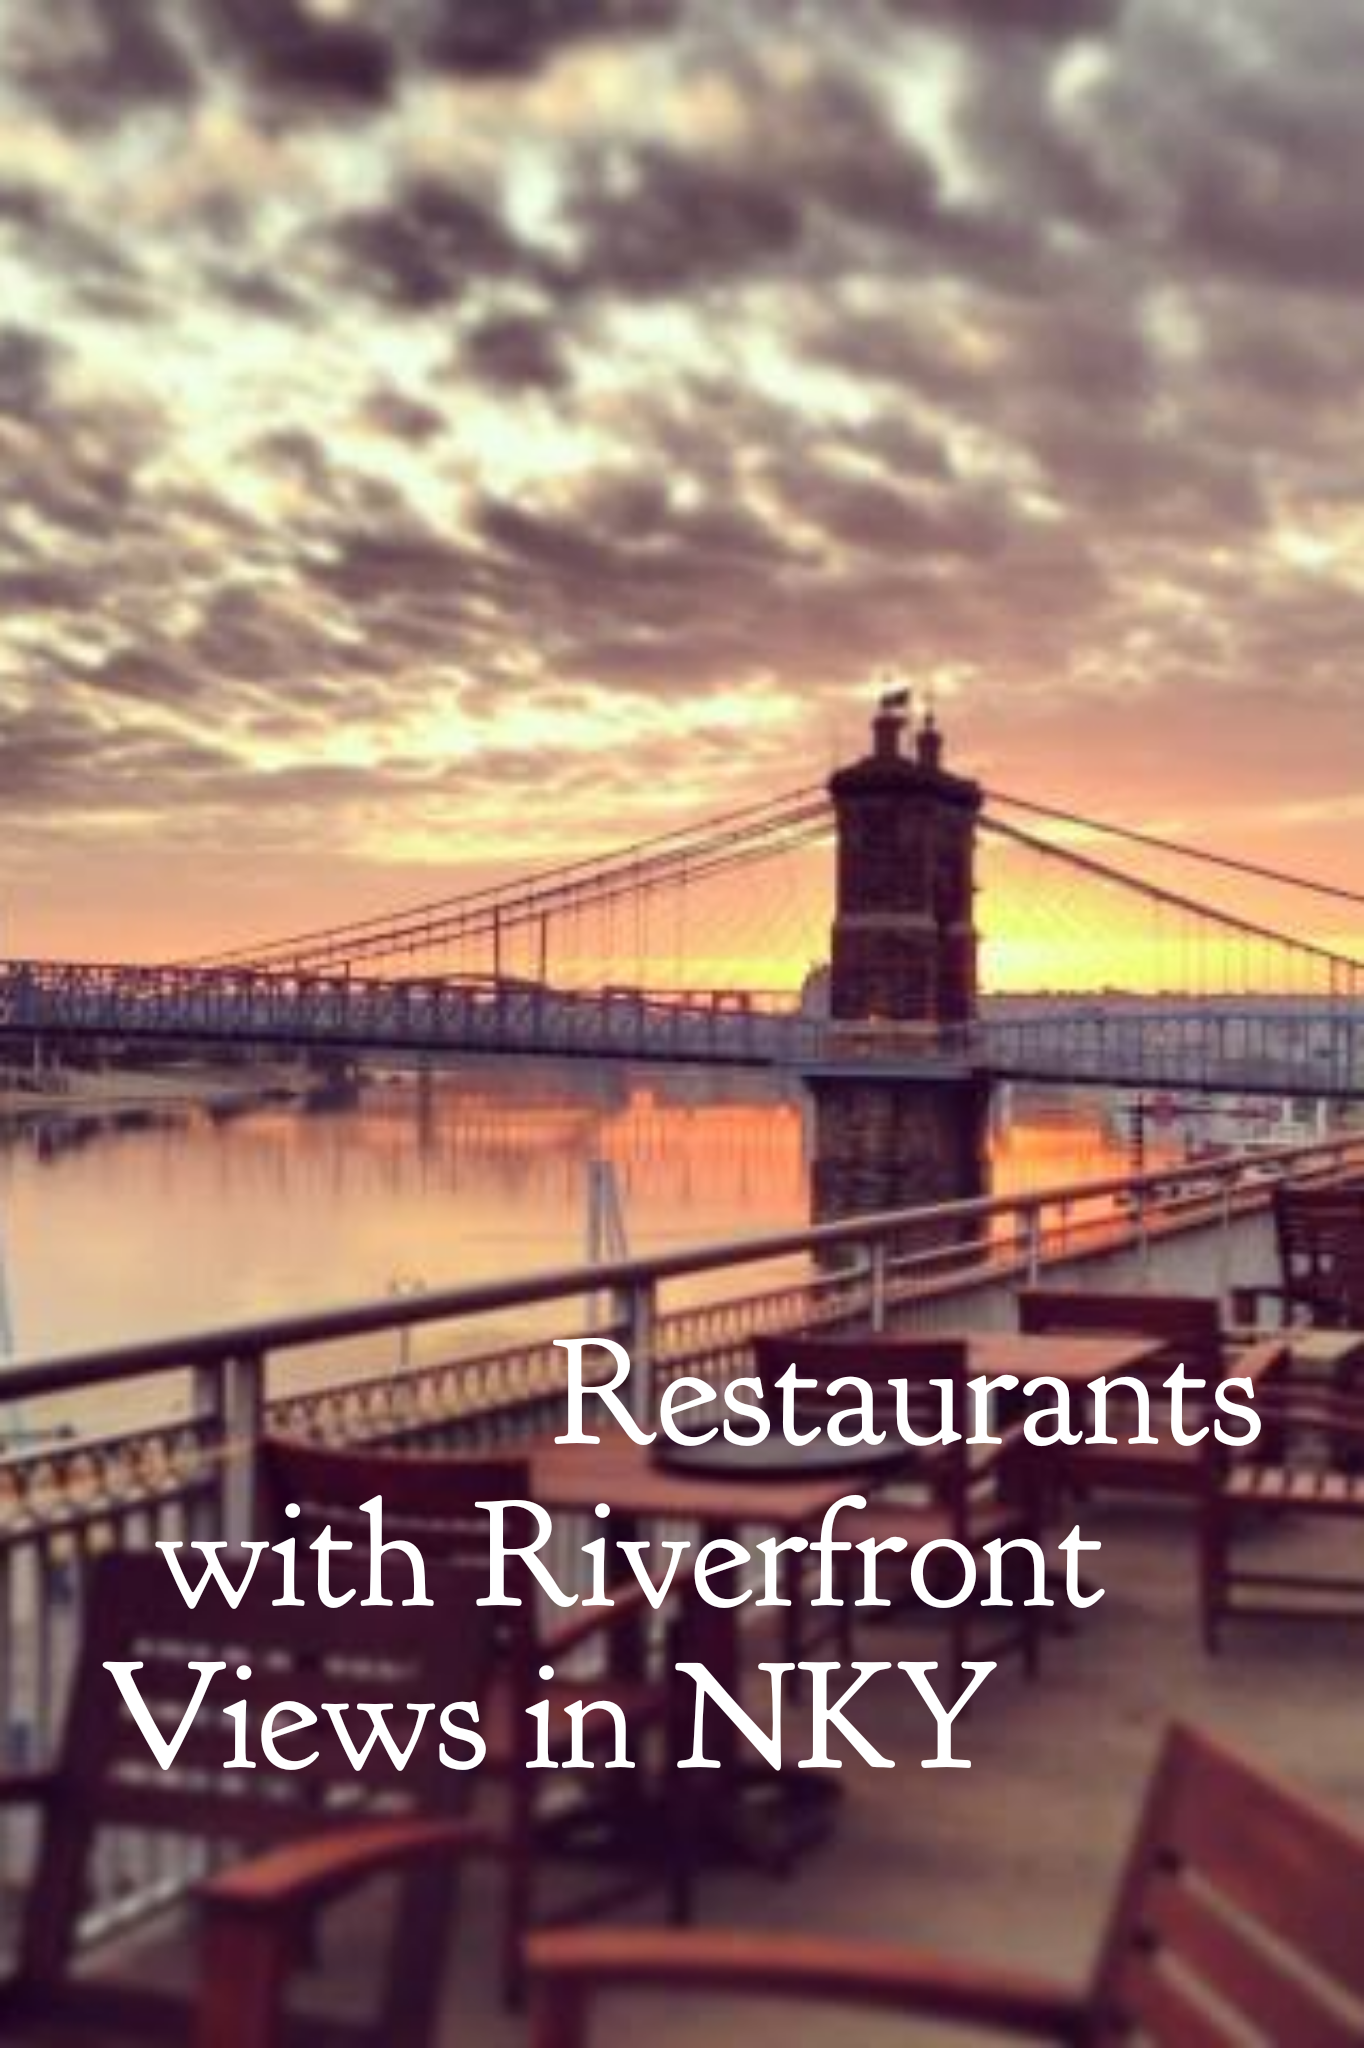 The Roebling suspension bridge at sunrise with a restaurant patio in the foreground and the title Restaurants with Riverfront Views in NKY